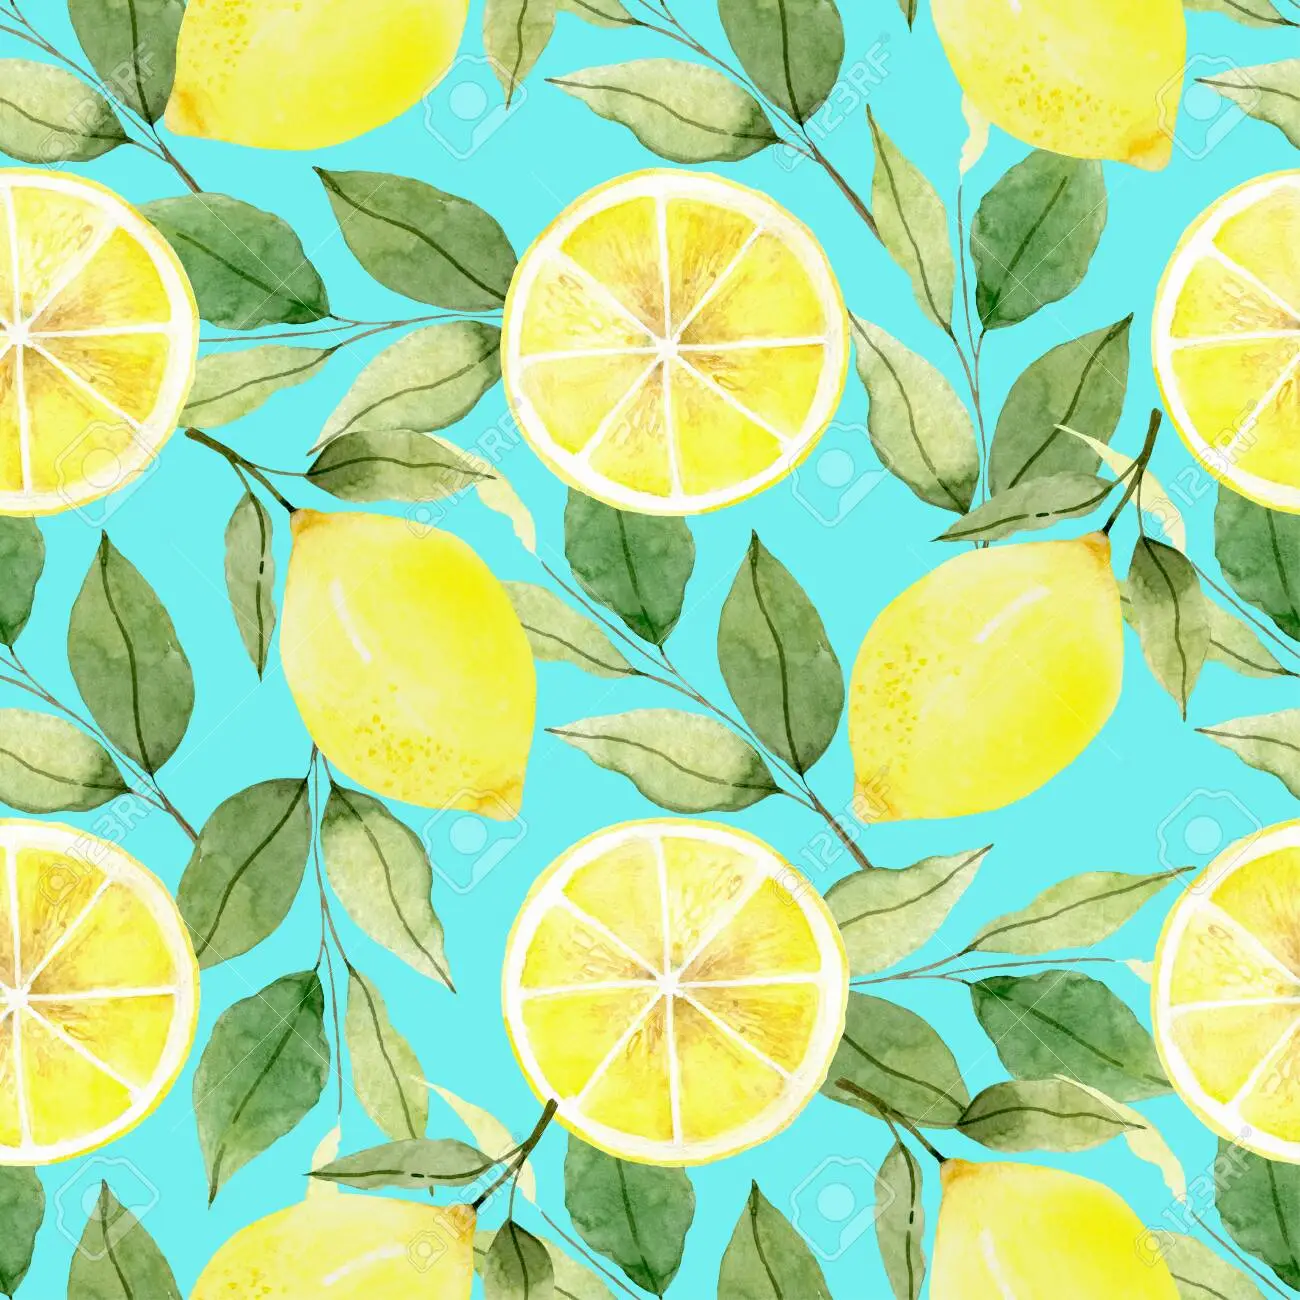 Lemon watercolor pattern background fruit wallpaper lemon wreath hello summer stock photo picture and royalty free image image